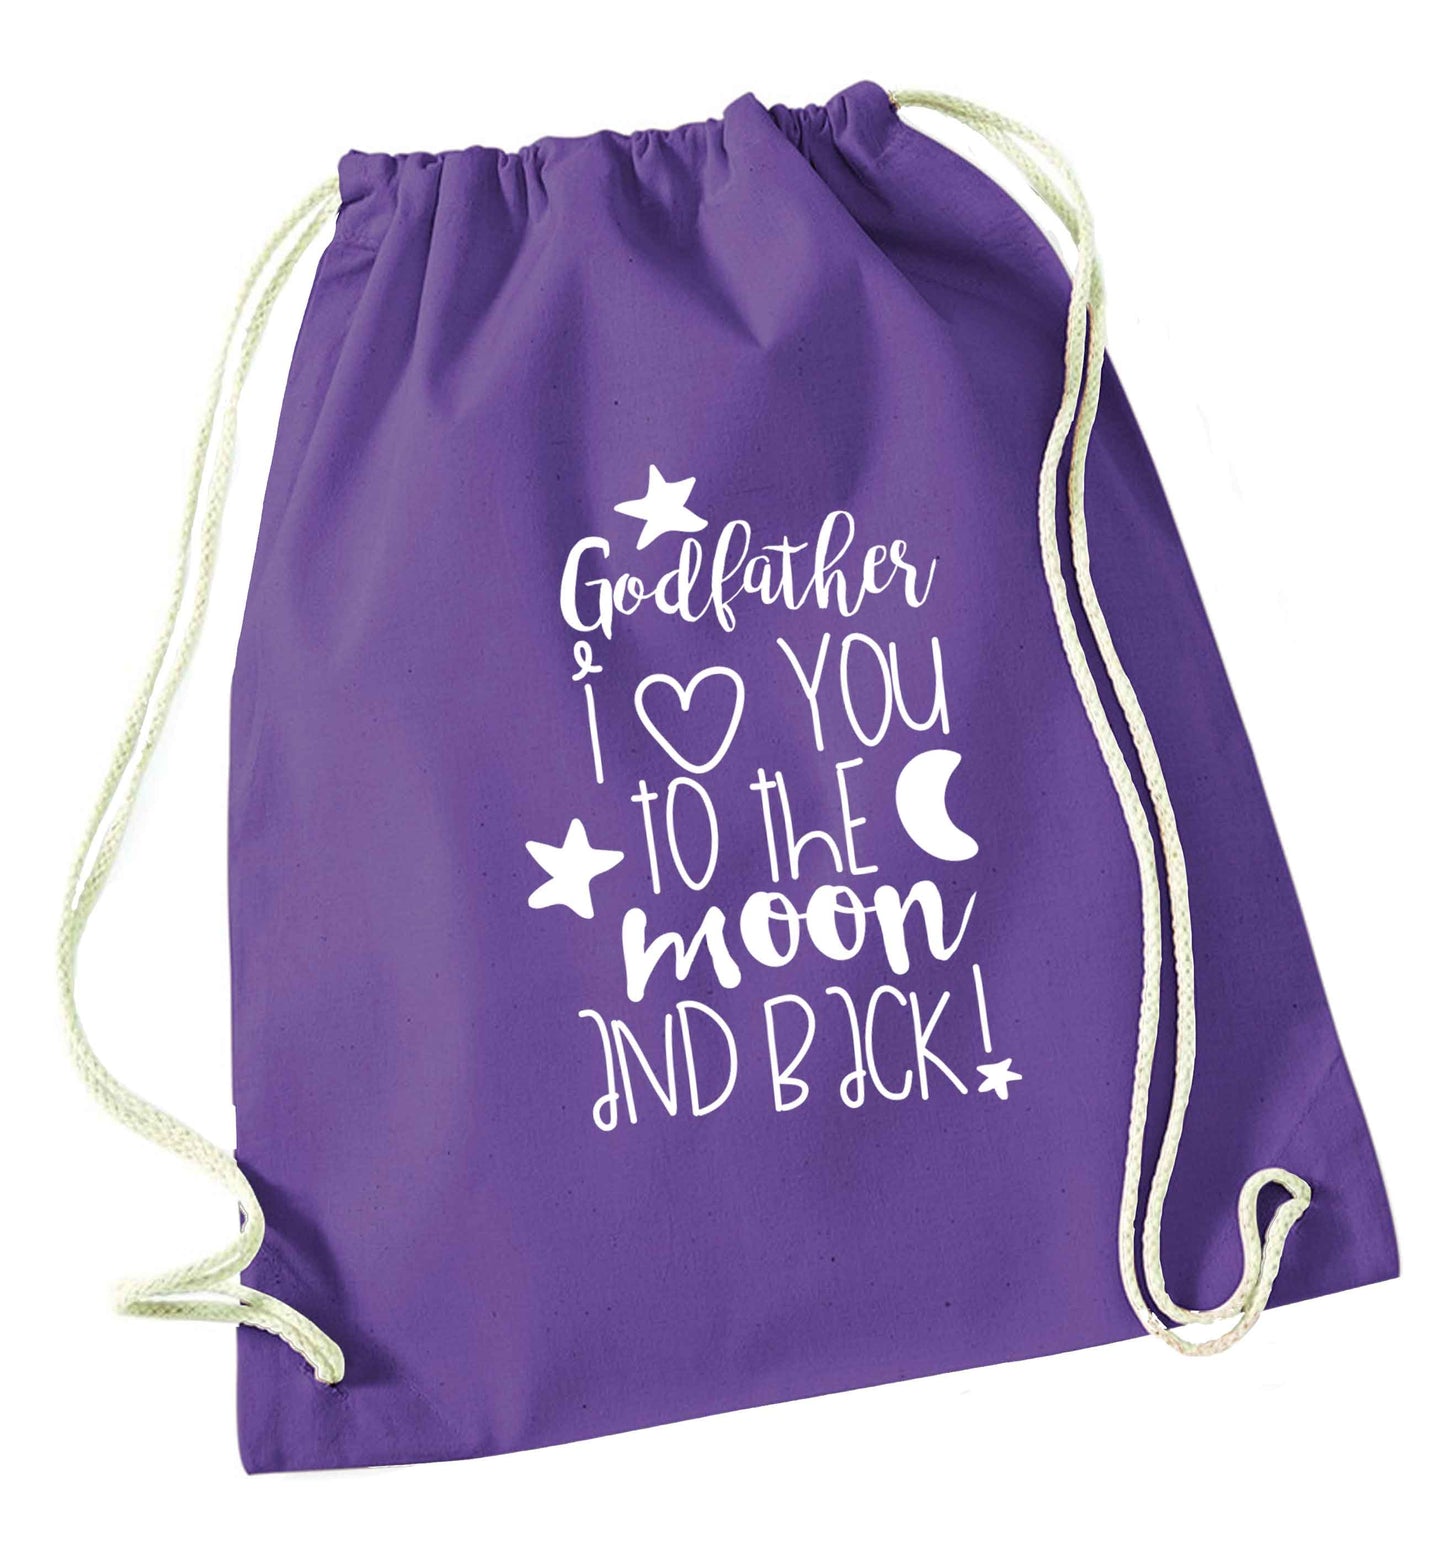 Godfather I love you to the moon and back purple drawstring bag